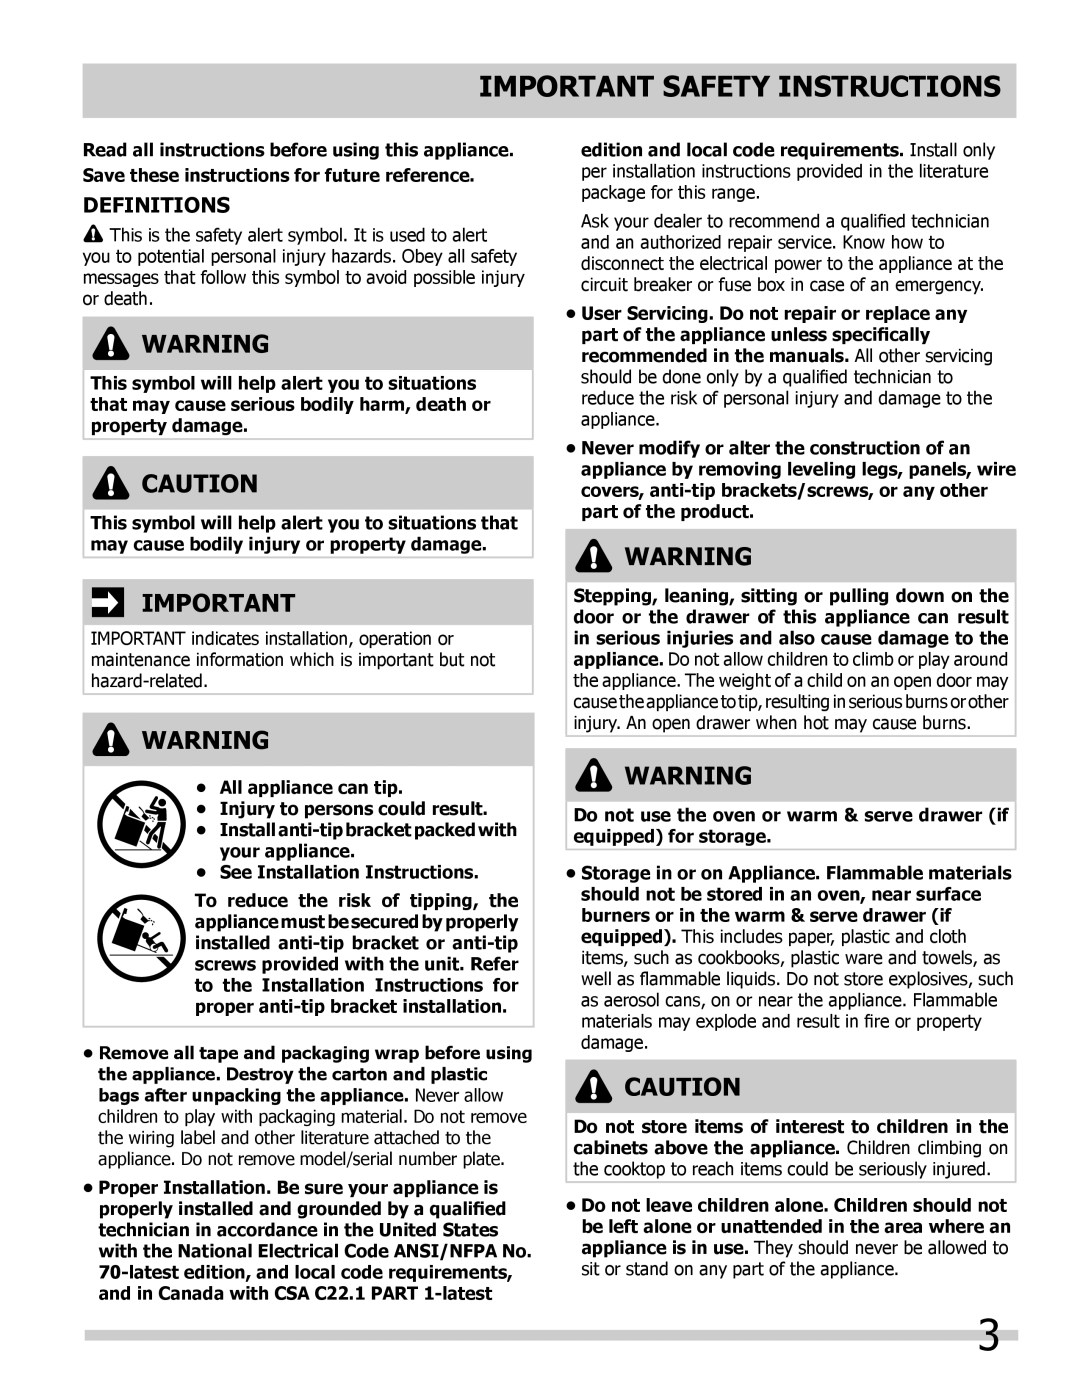 Frigidaire C, A, B manual Important Safety Instructions, Definitions 